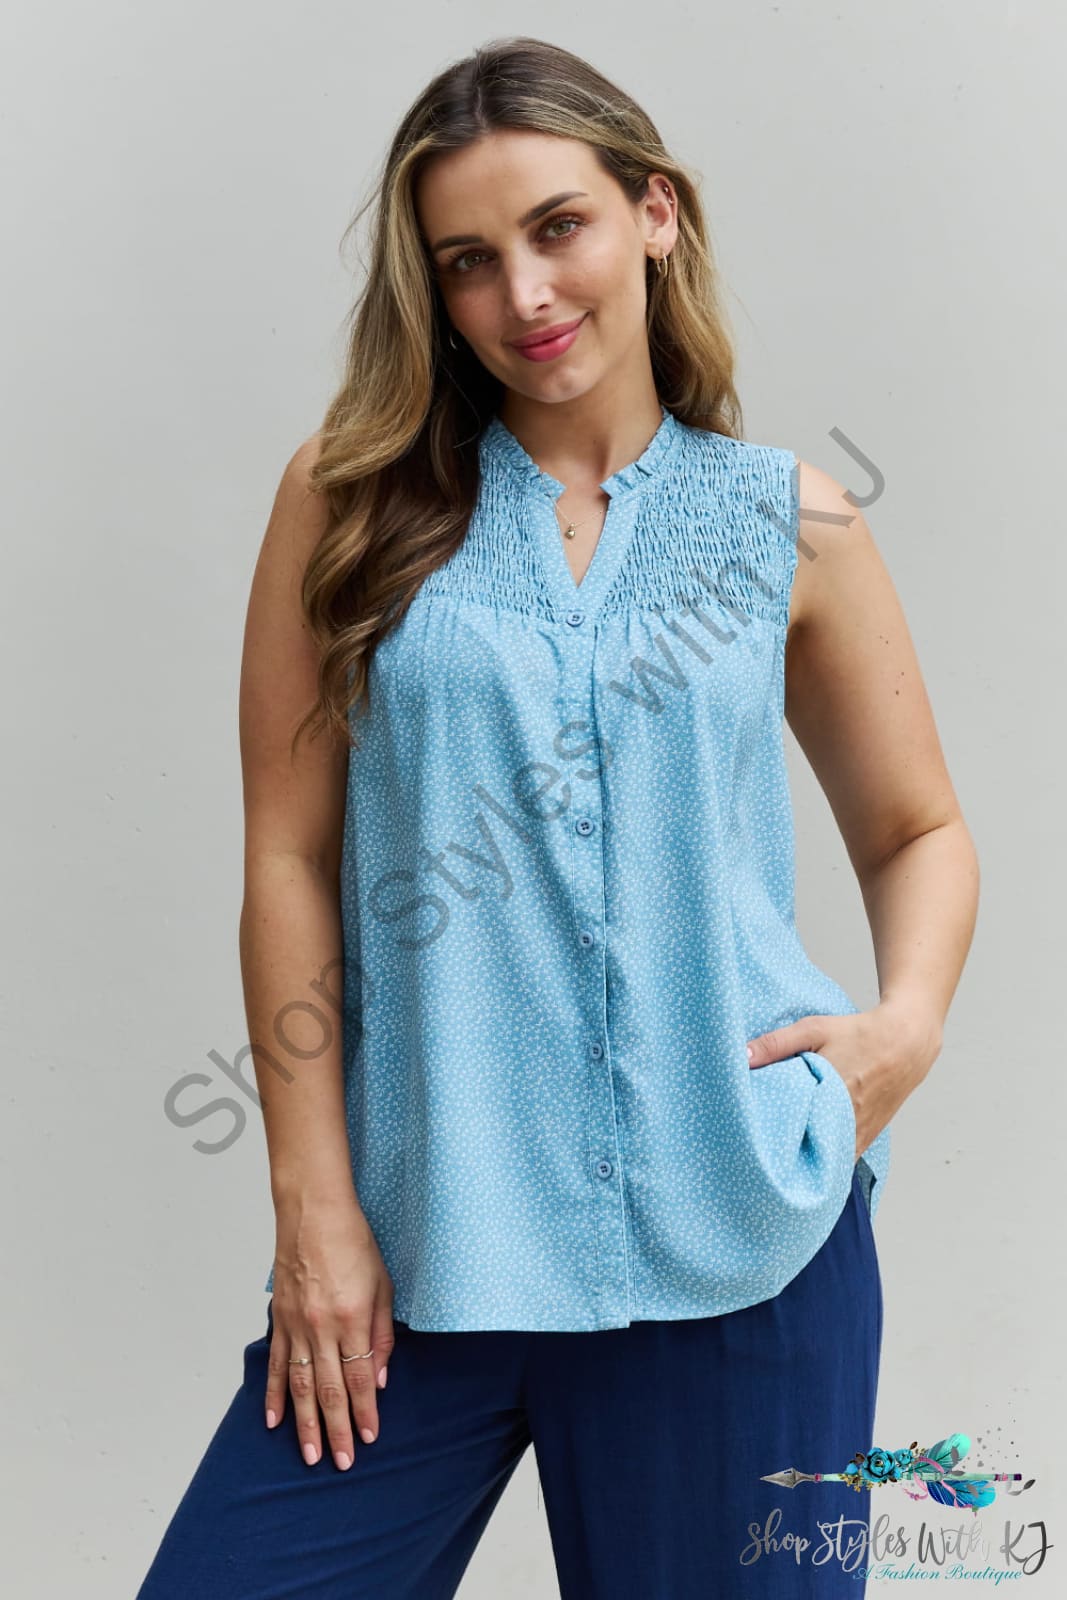 She Means Business Ruffled Floral Flare Shirt Shirts & Tops